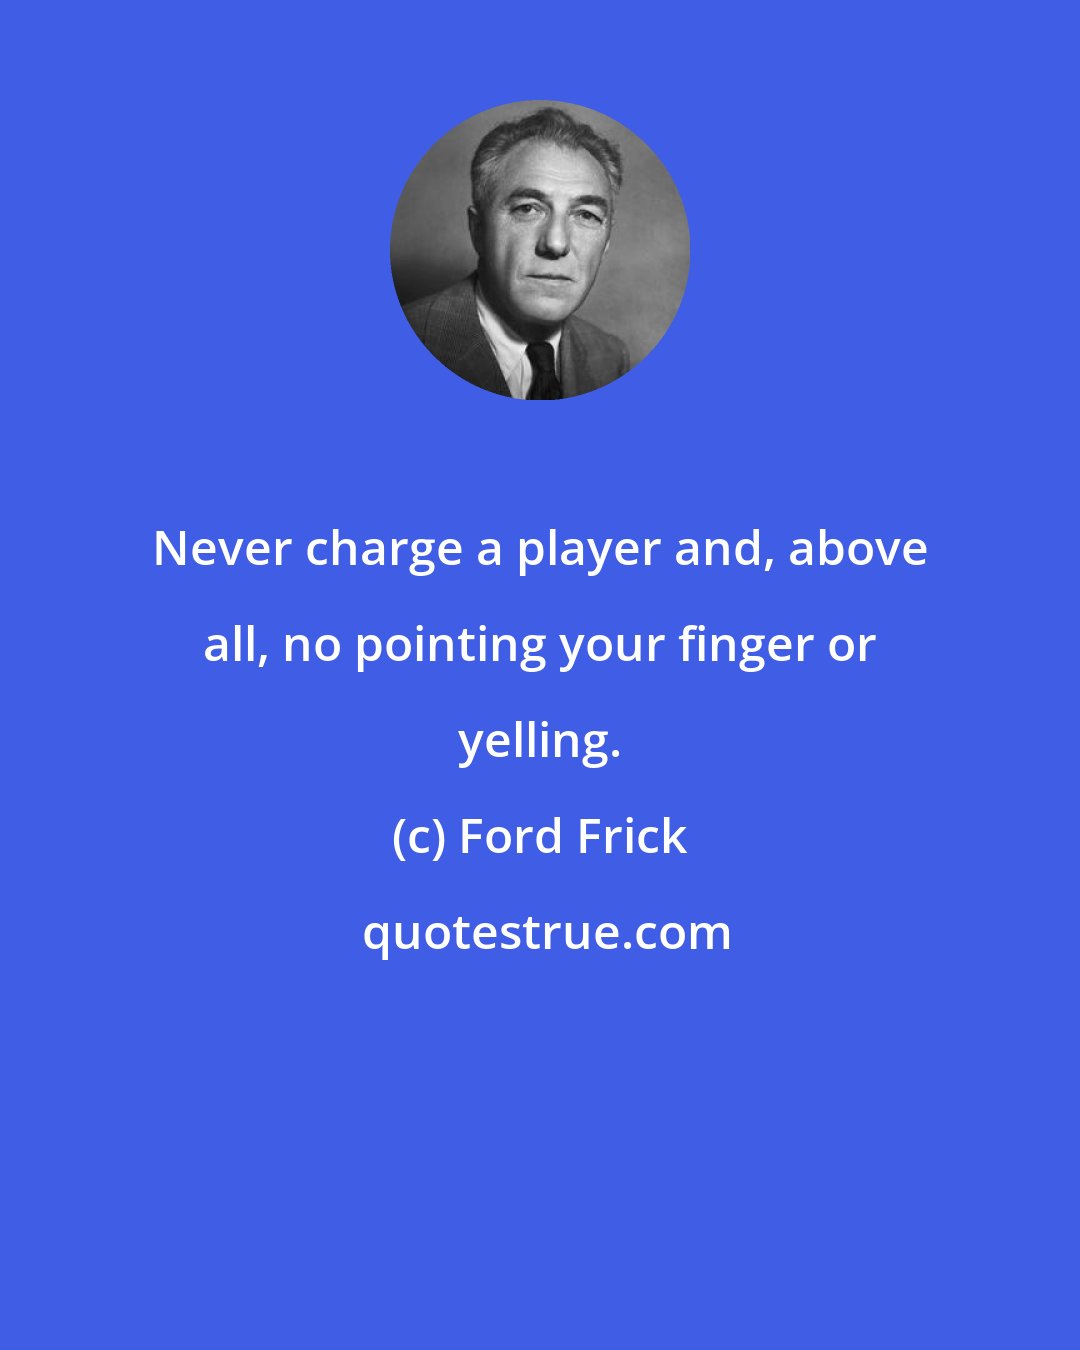 Ford Frick: Never charge a player and, above all, no pointing your finger or yelling.